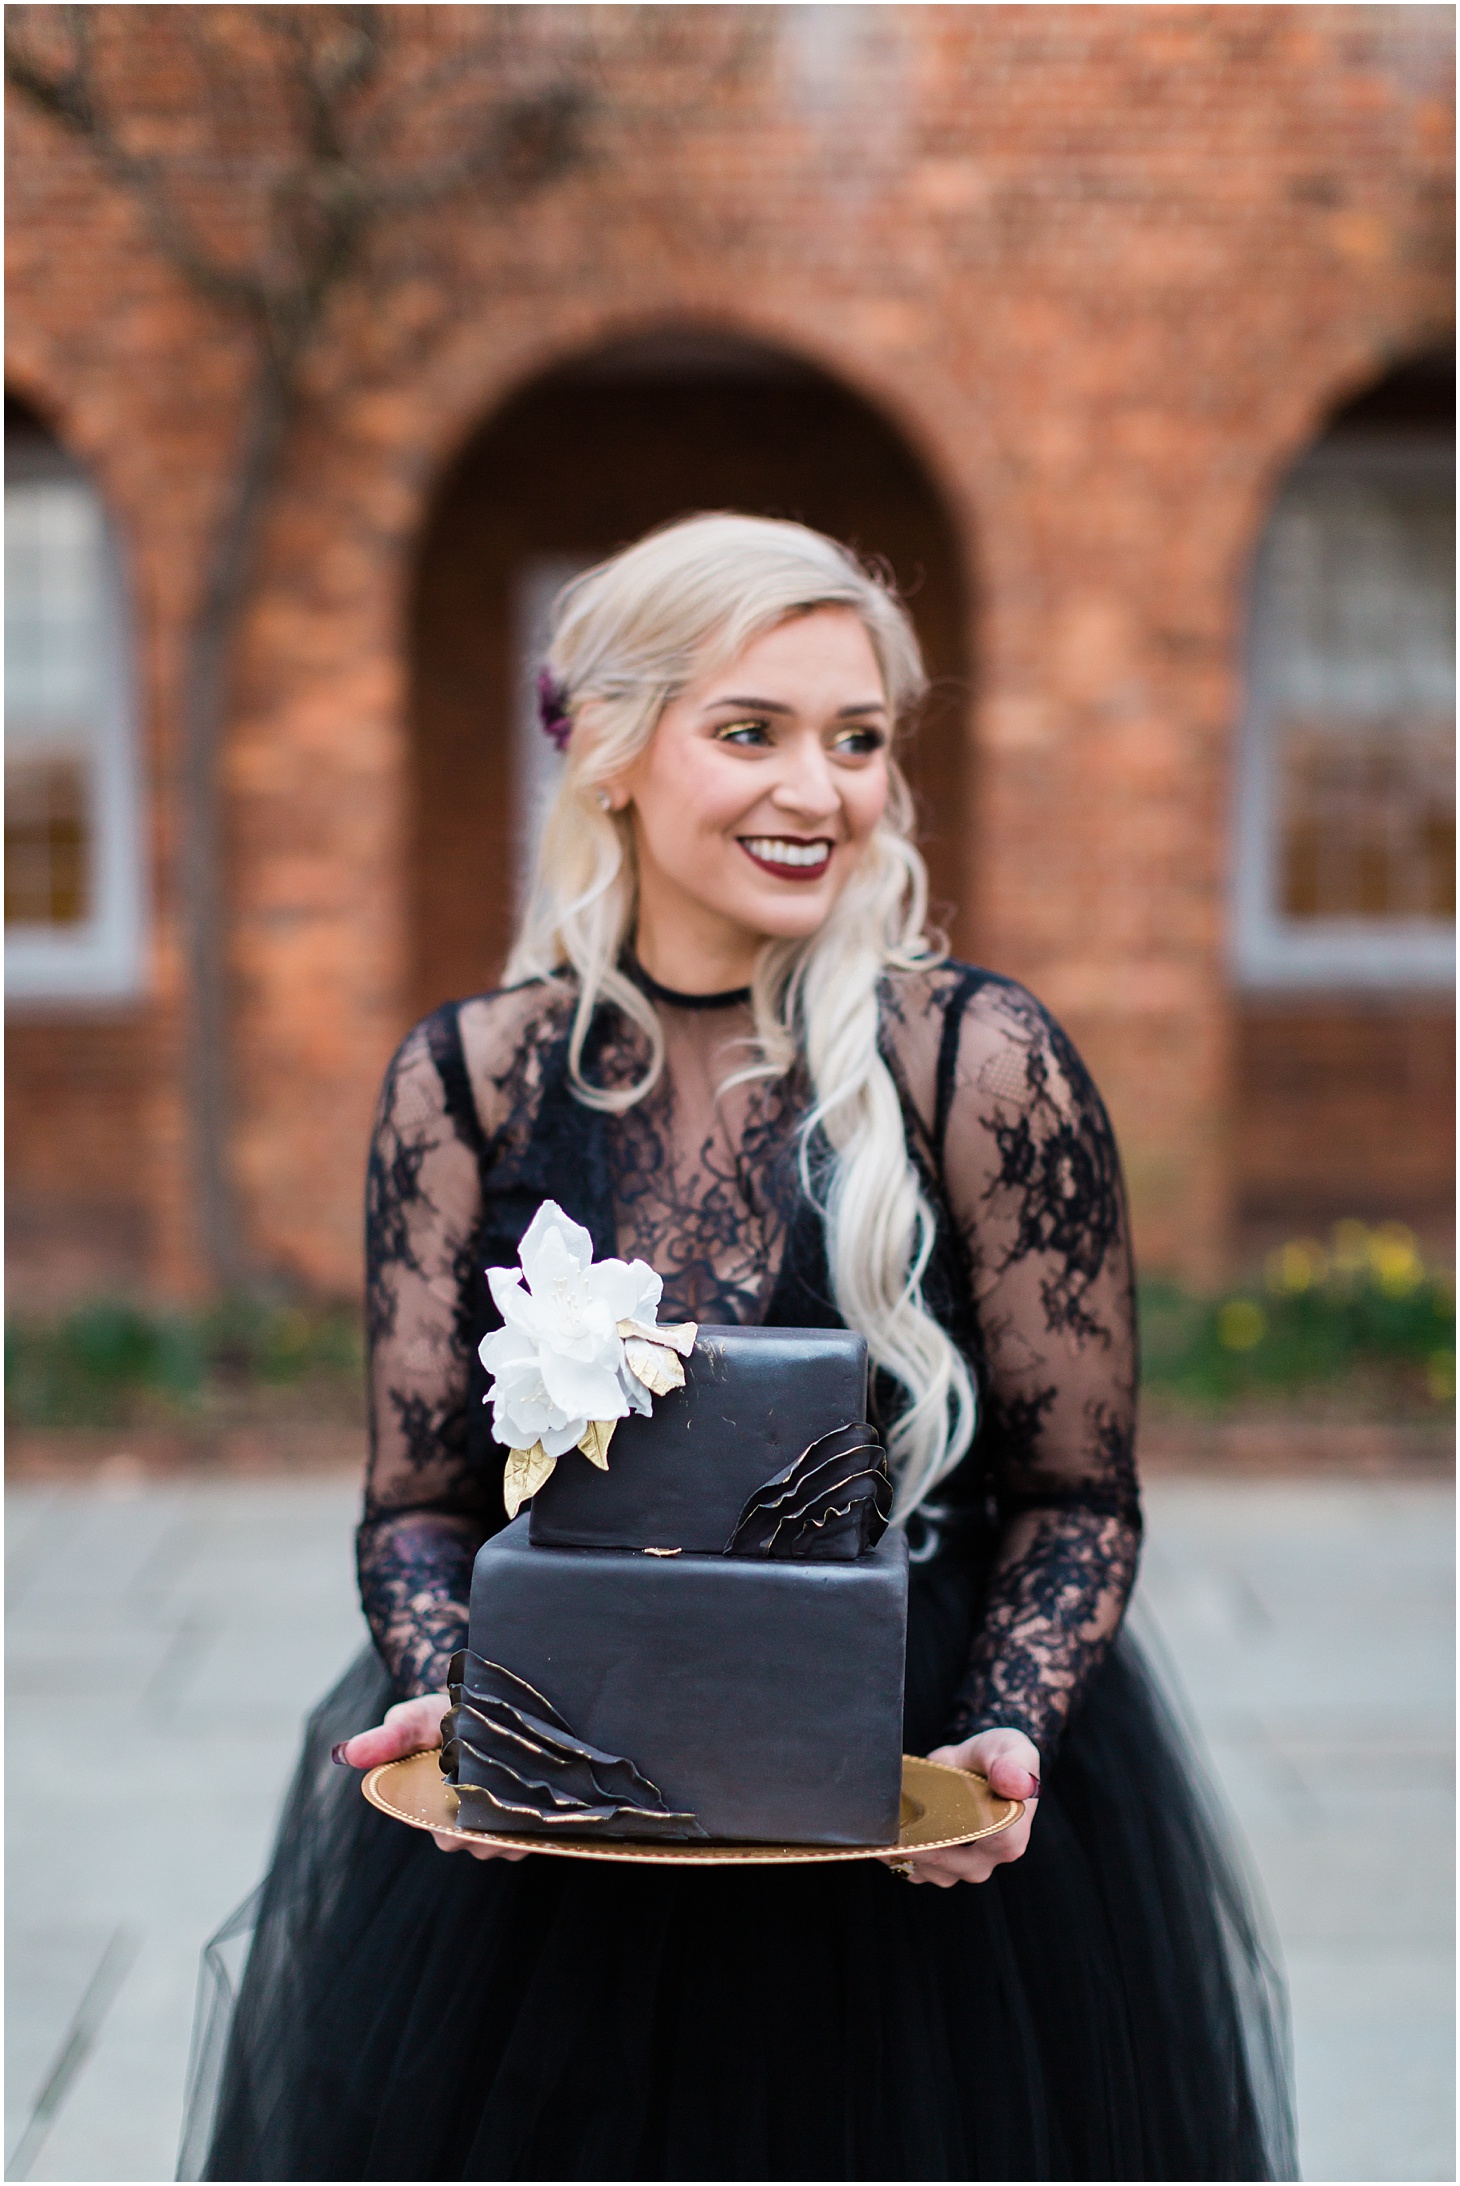 Sweets by E Black Wedding Cake | Black and Red Gothic-Inspired Wedding Editorial | Sarah Bradshaw Photography